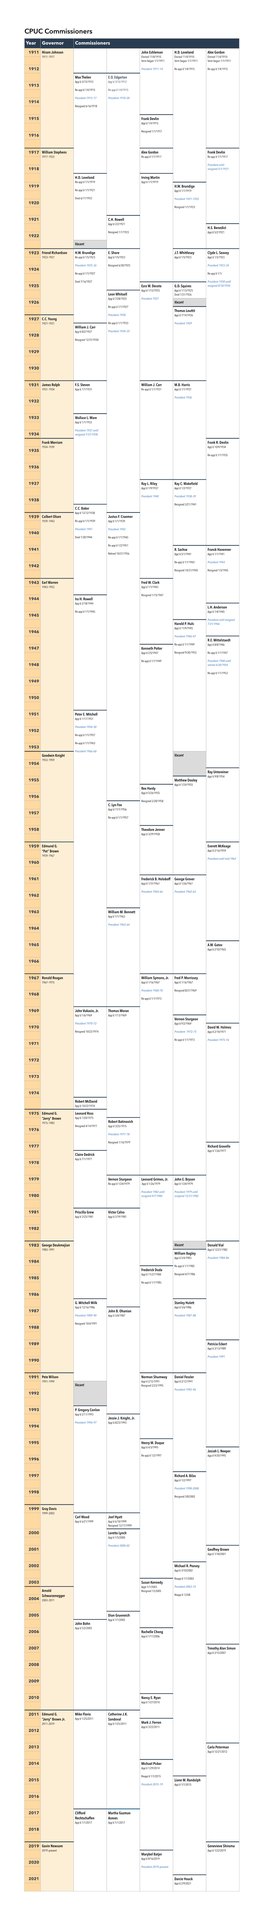 Commissioners Timeline 080521